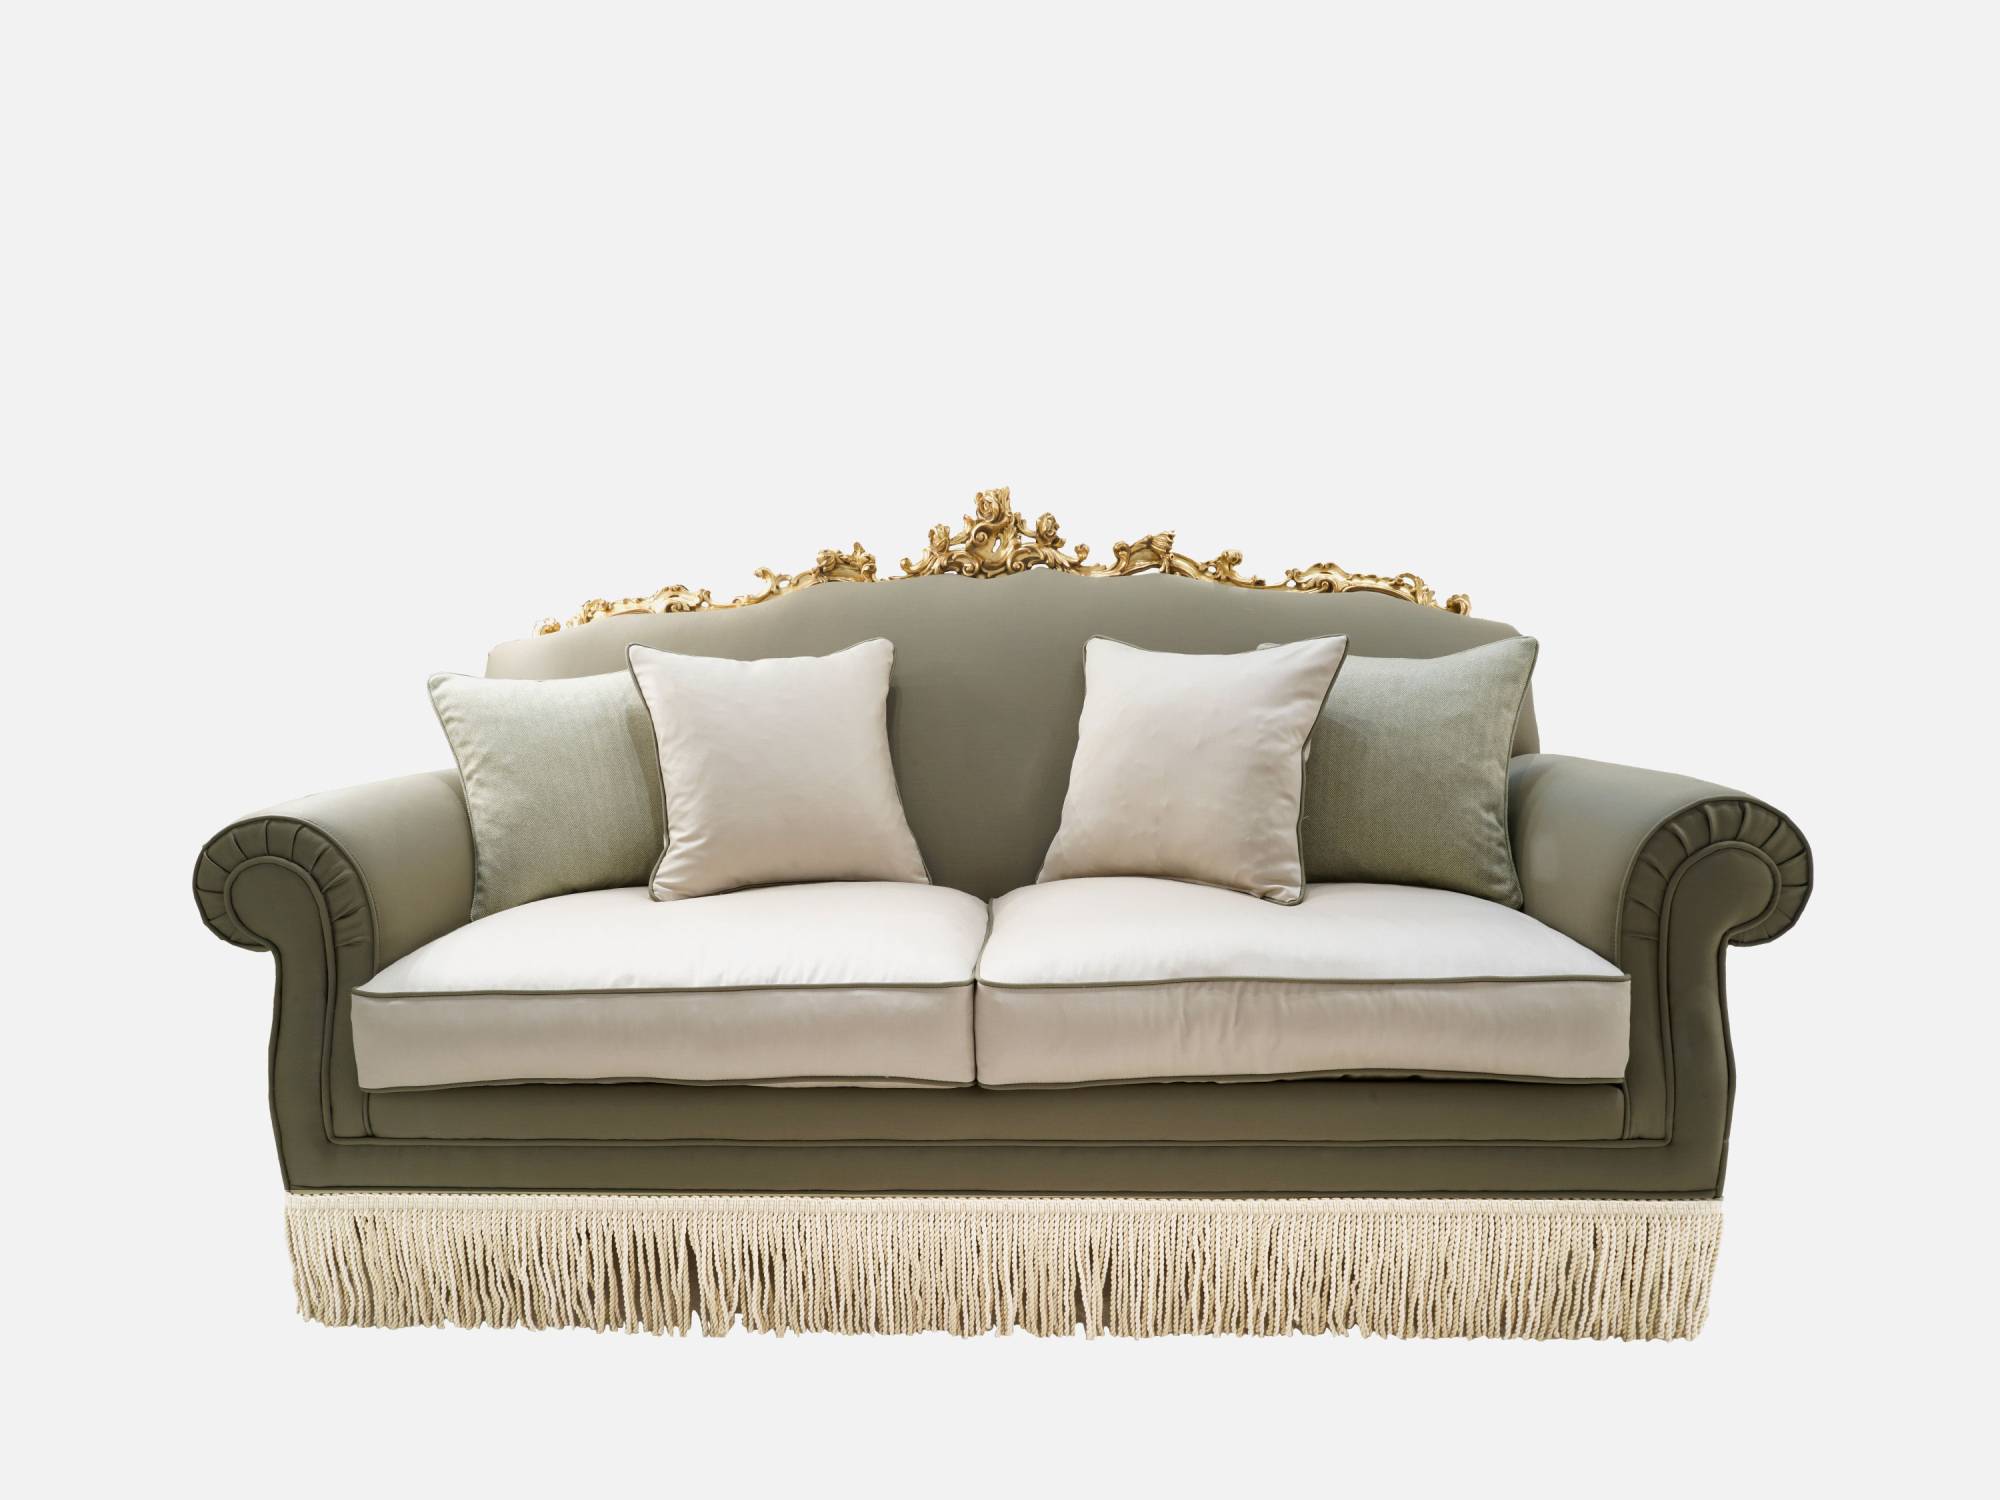 ART. 2201 – The elegance of luxury classic Sofas made in Italy by C.G. Capelletti.